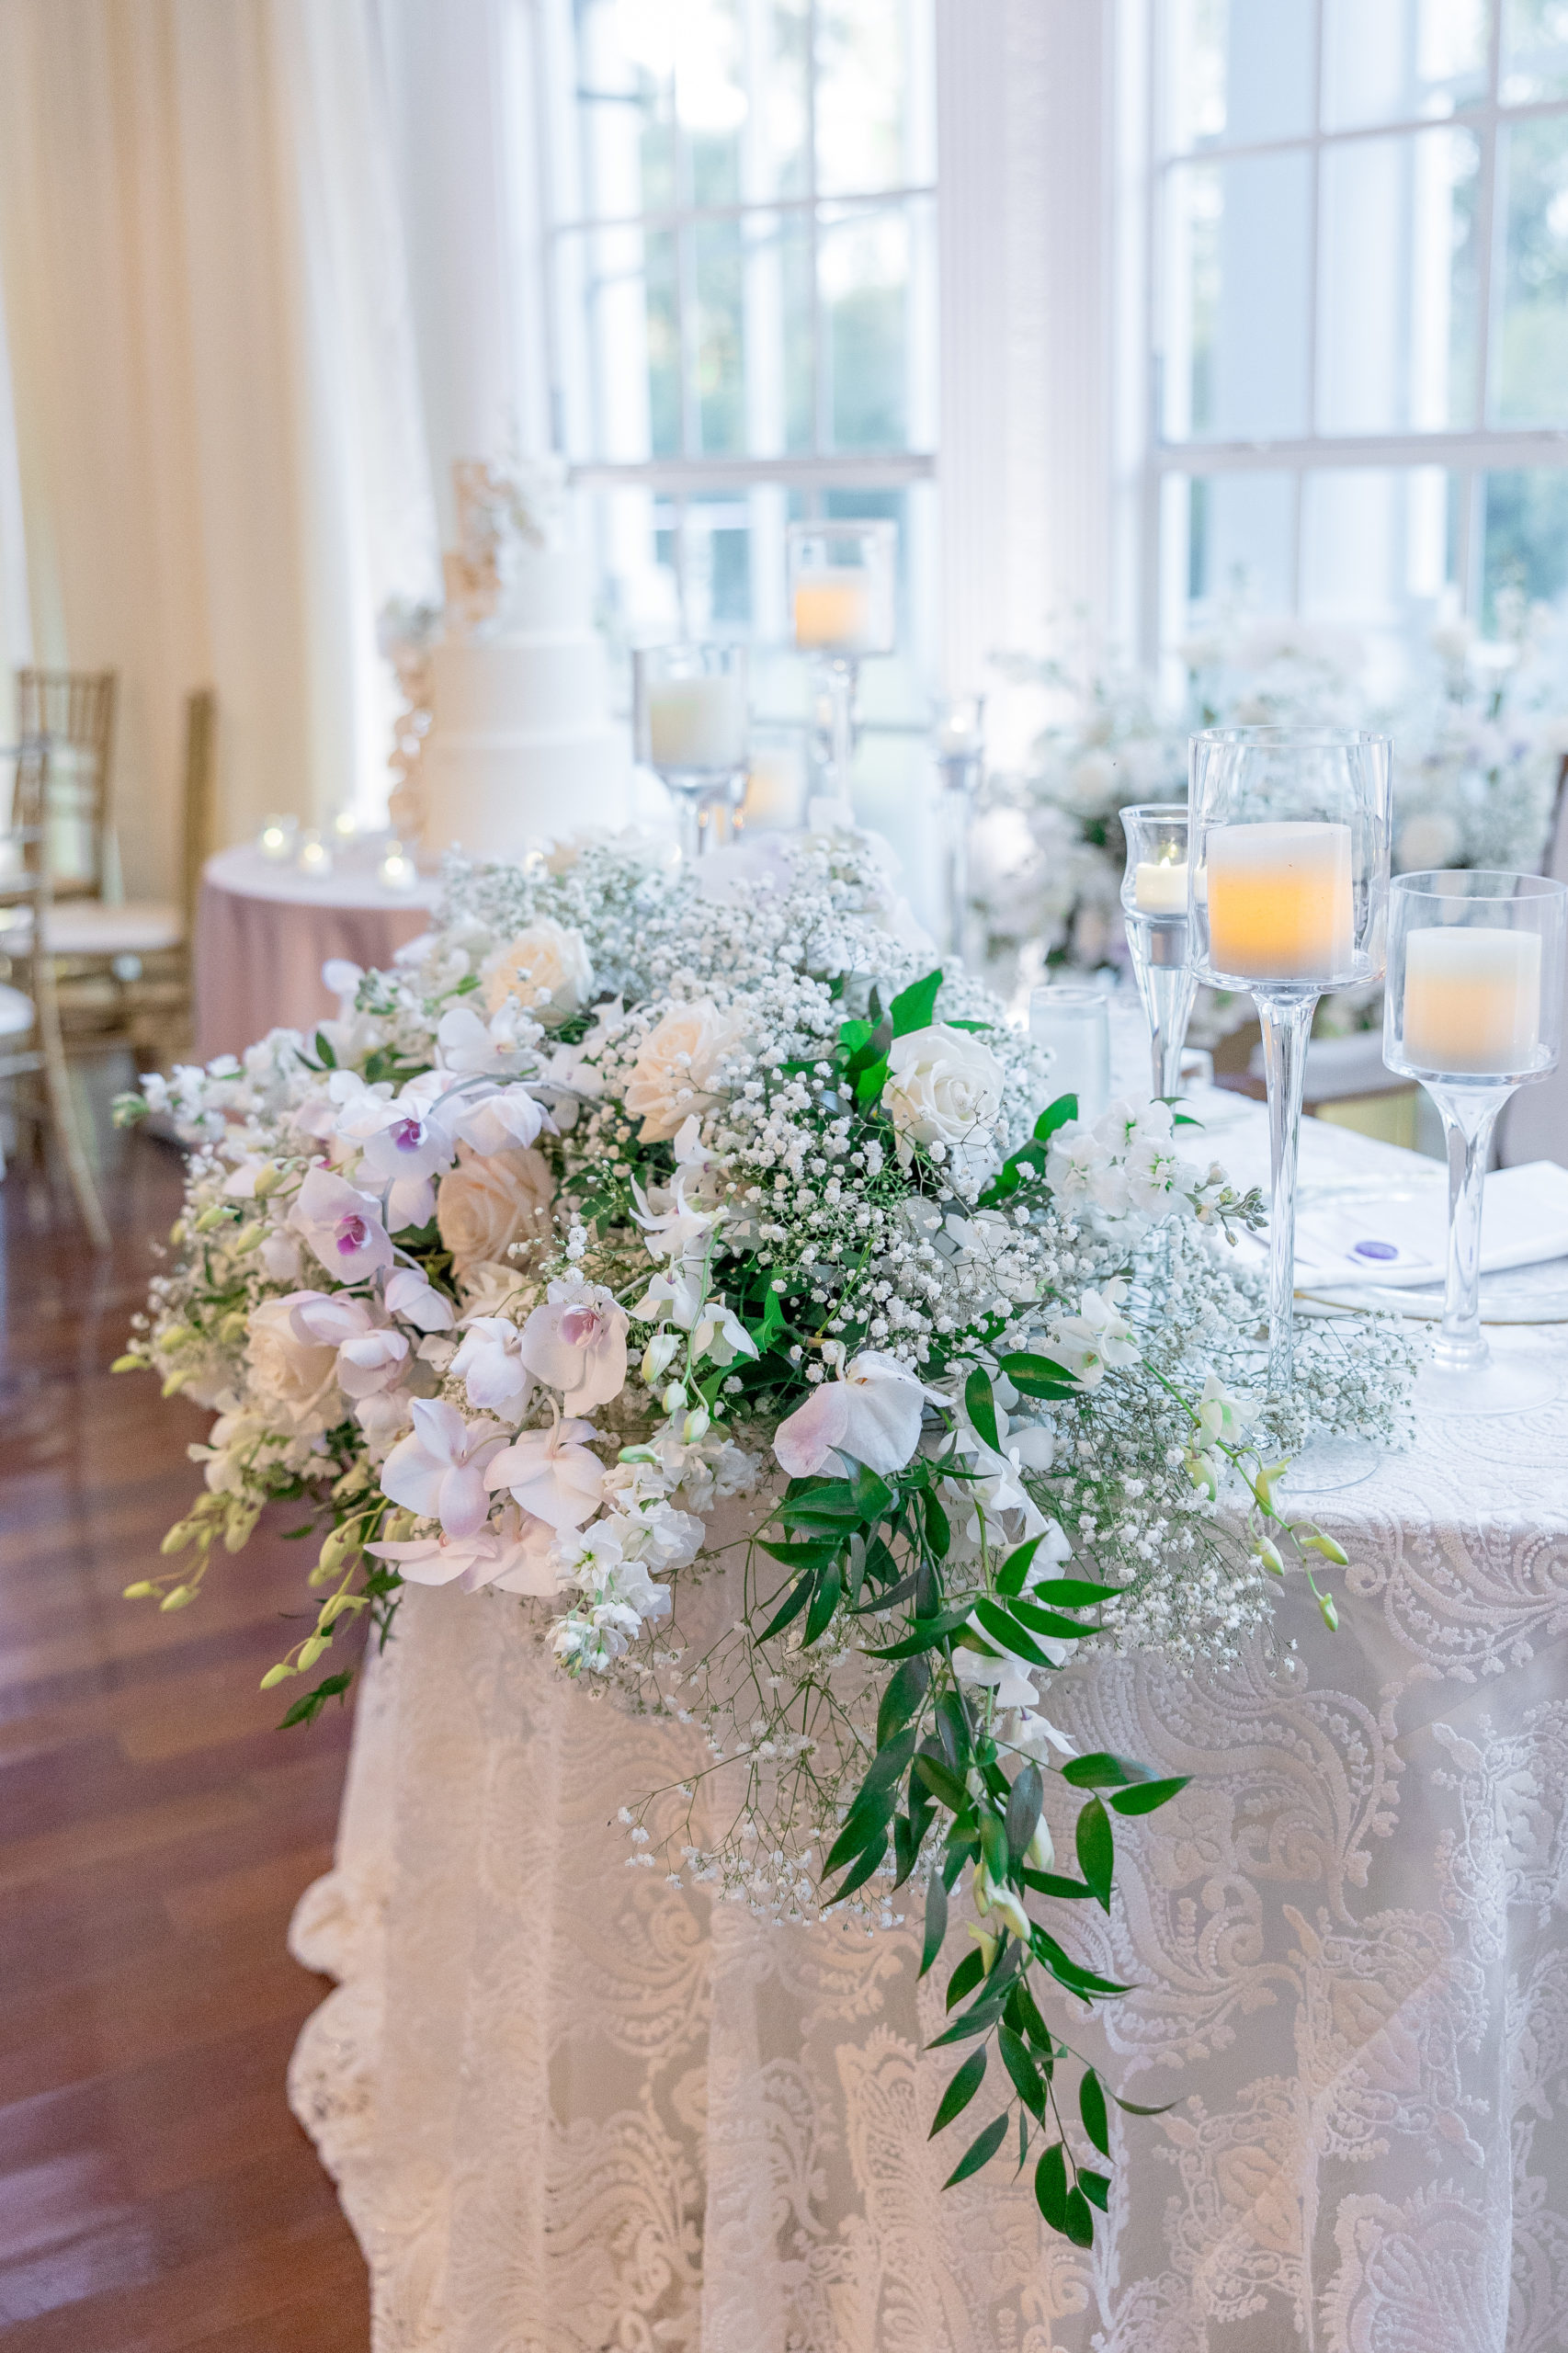 Bride and groom's wedding reception table bouquet of white roses and light purple flowers with candles in tall glasses for Luxmore Grande Wedding